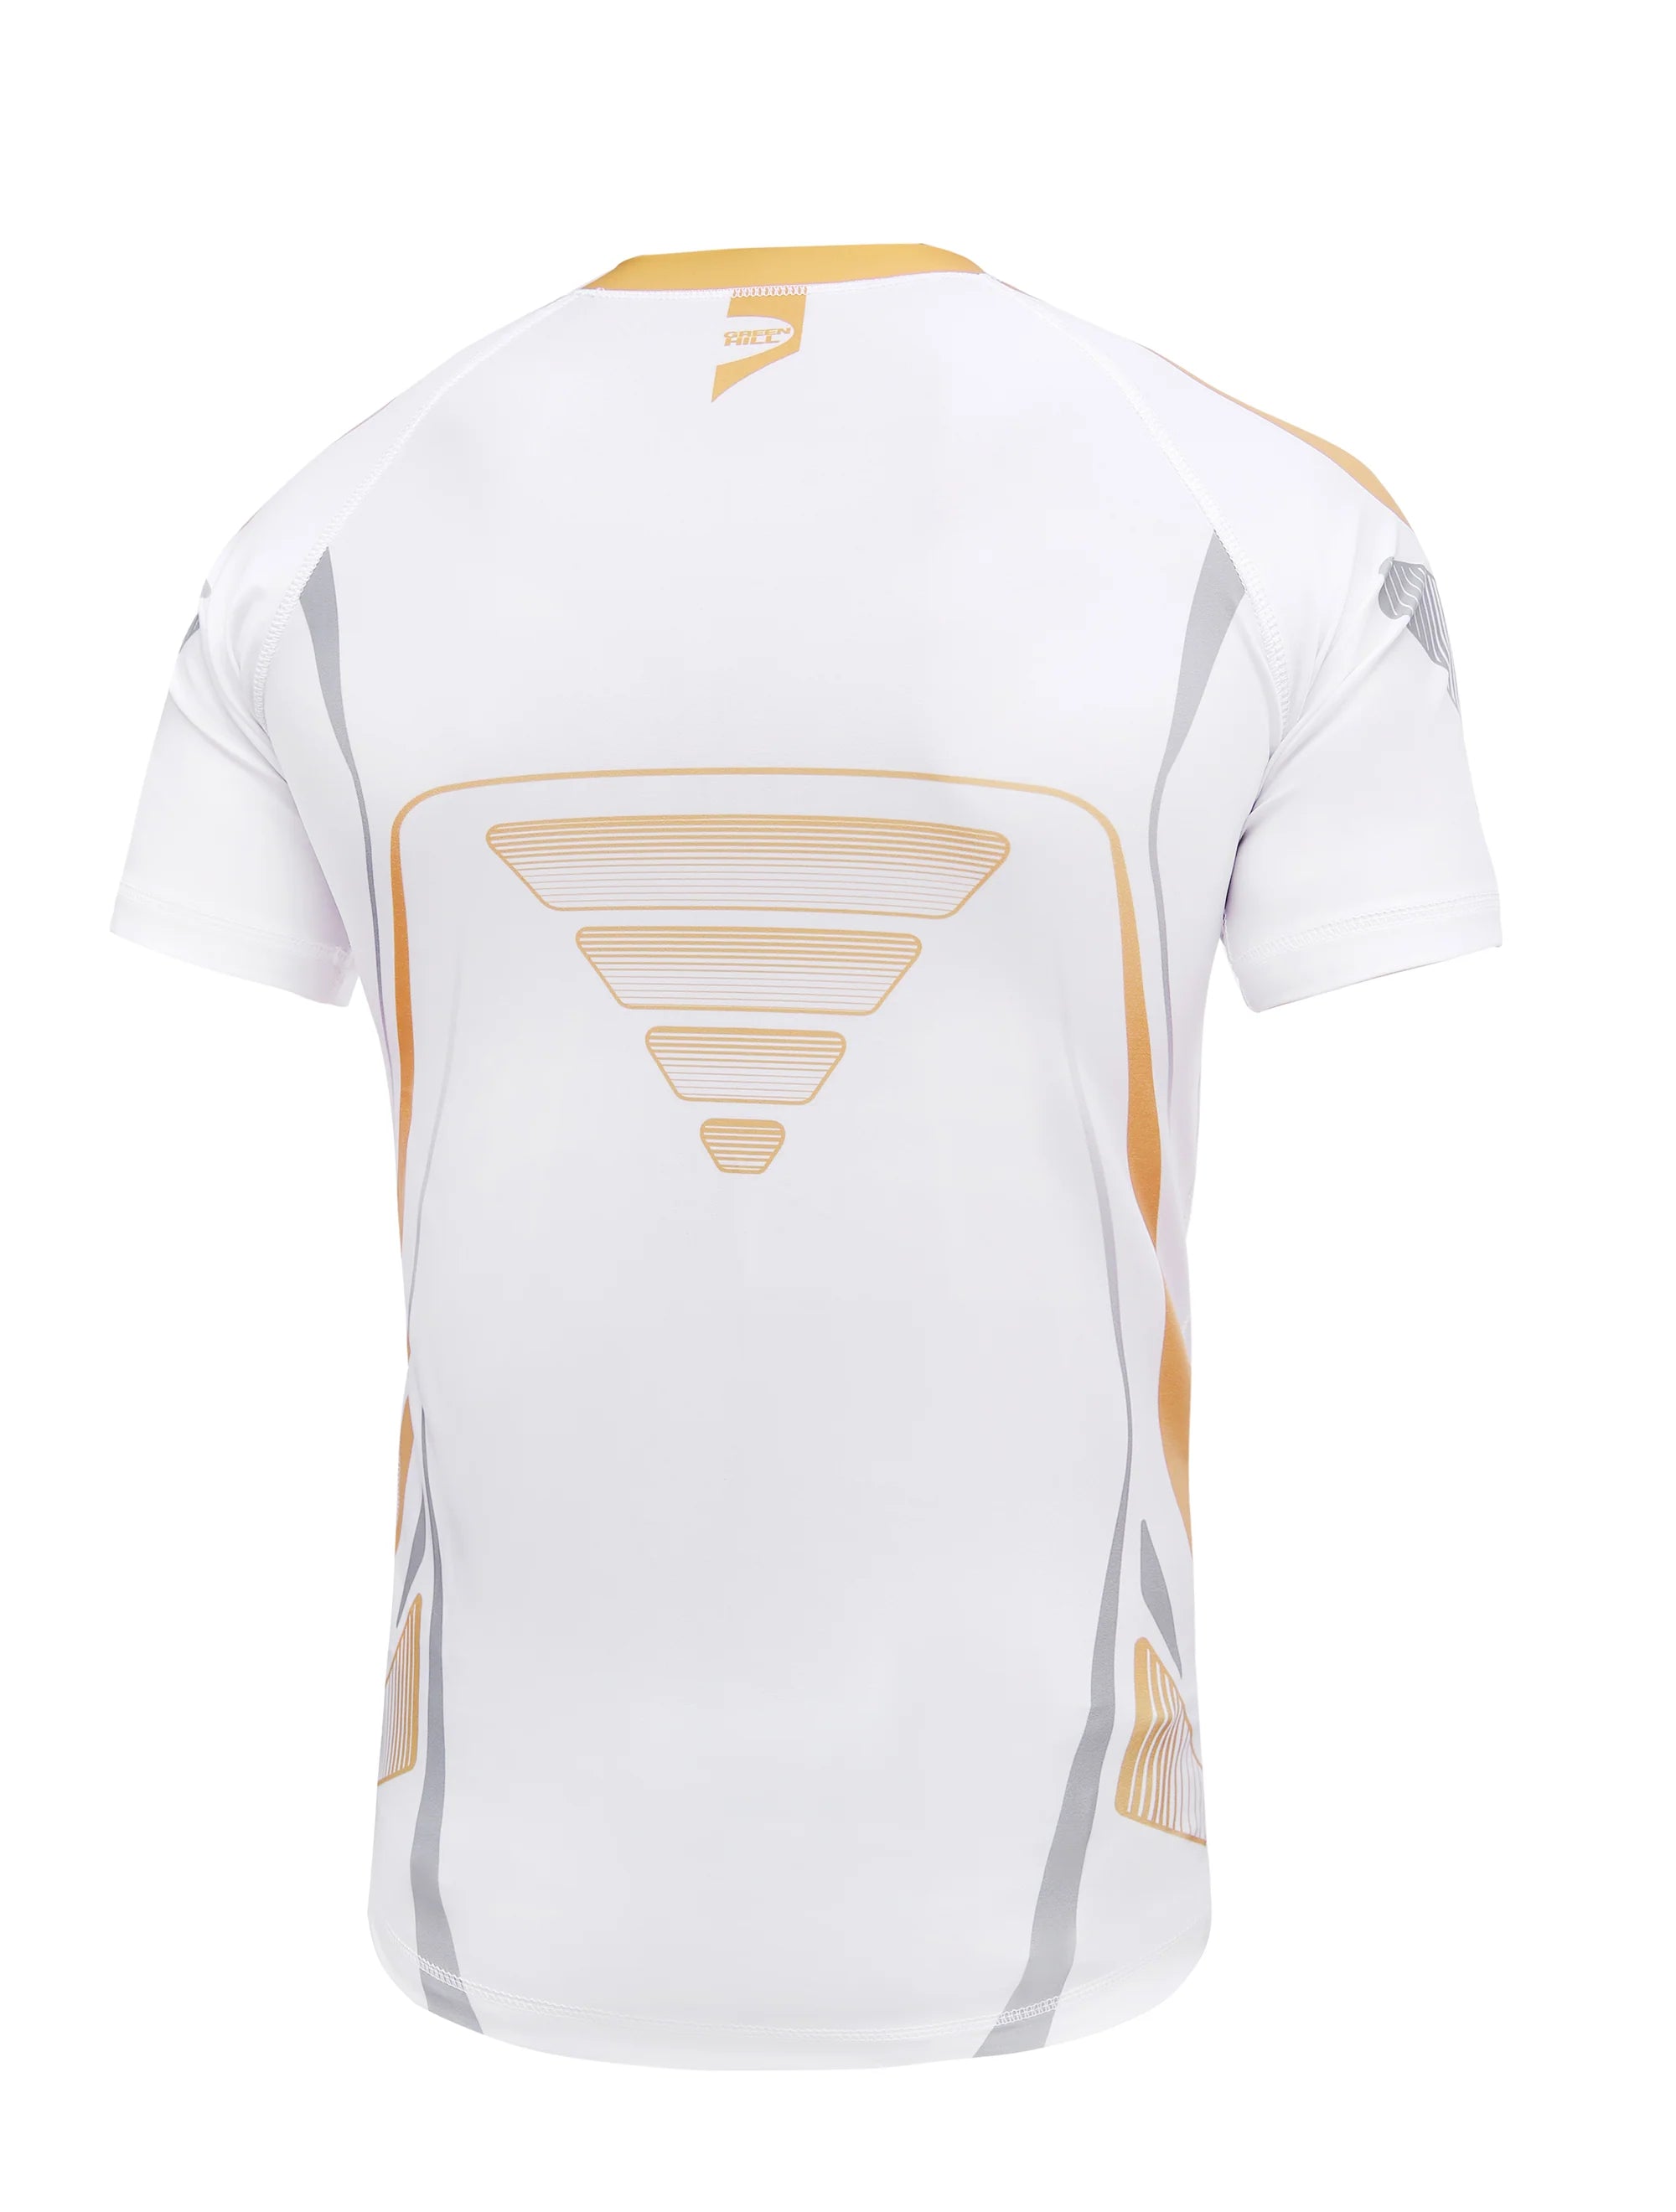 GREEN HILL IMMAF APPROVED RASH GUARD WHITE 2023